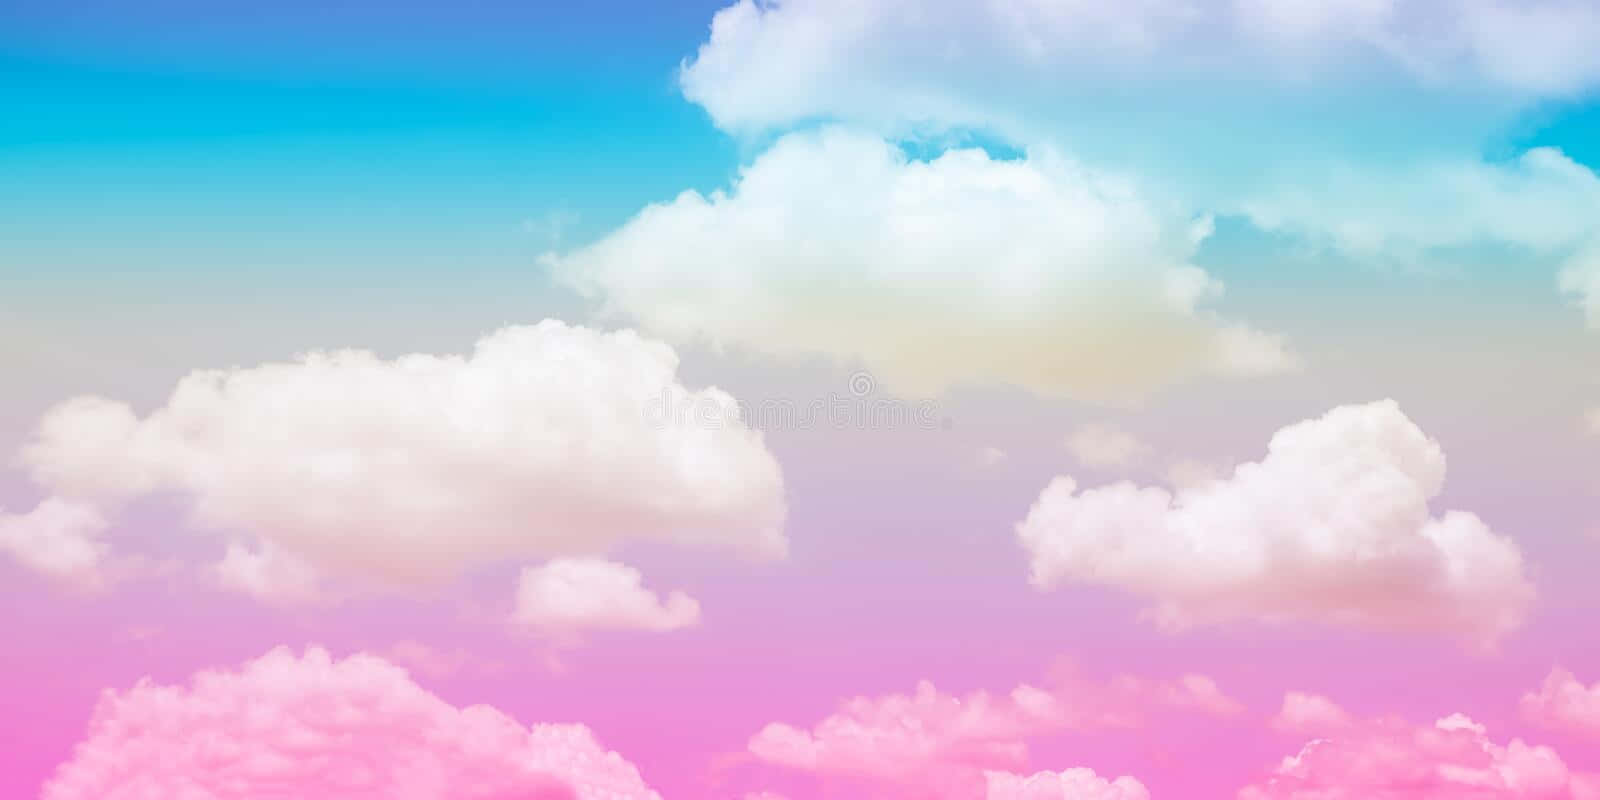 A beautiful sunrise of shades of pink, blue and white Wallpaper